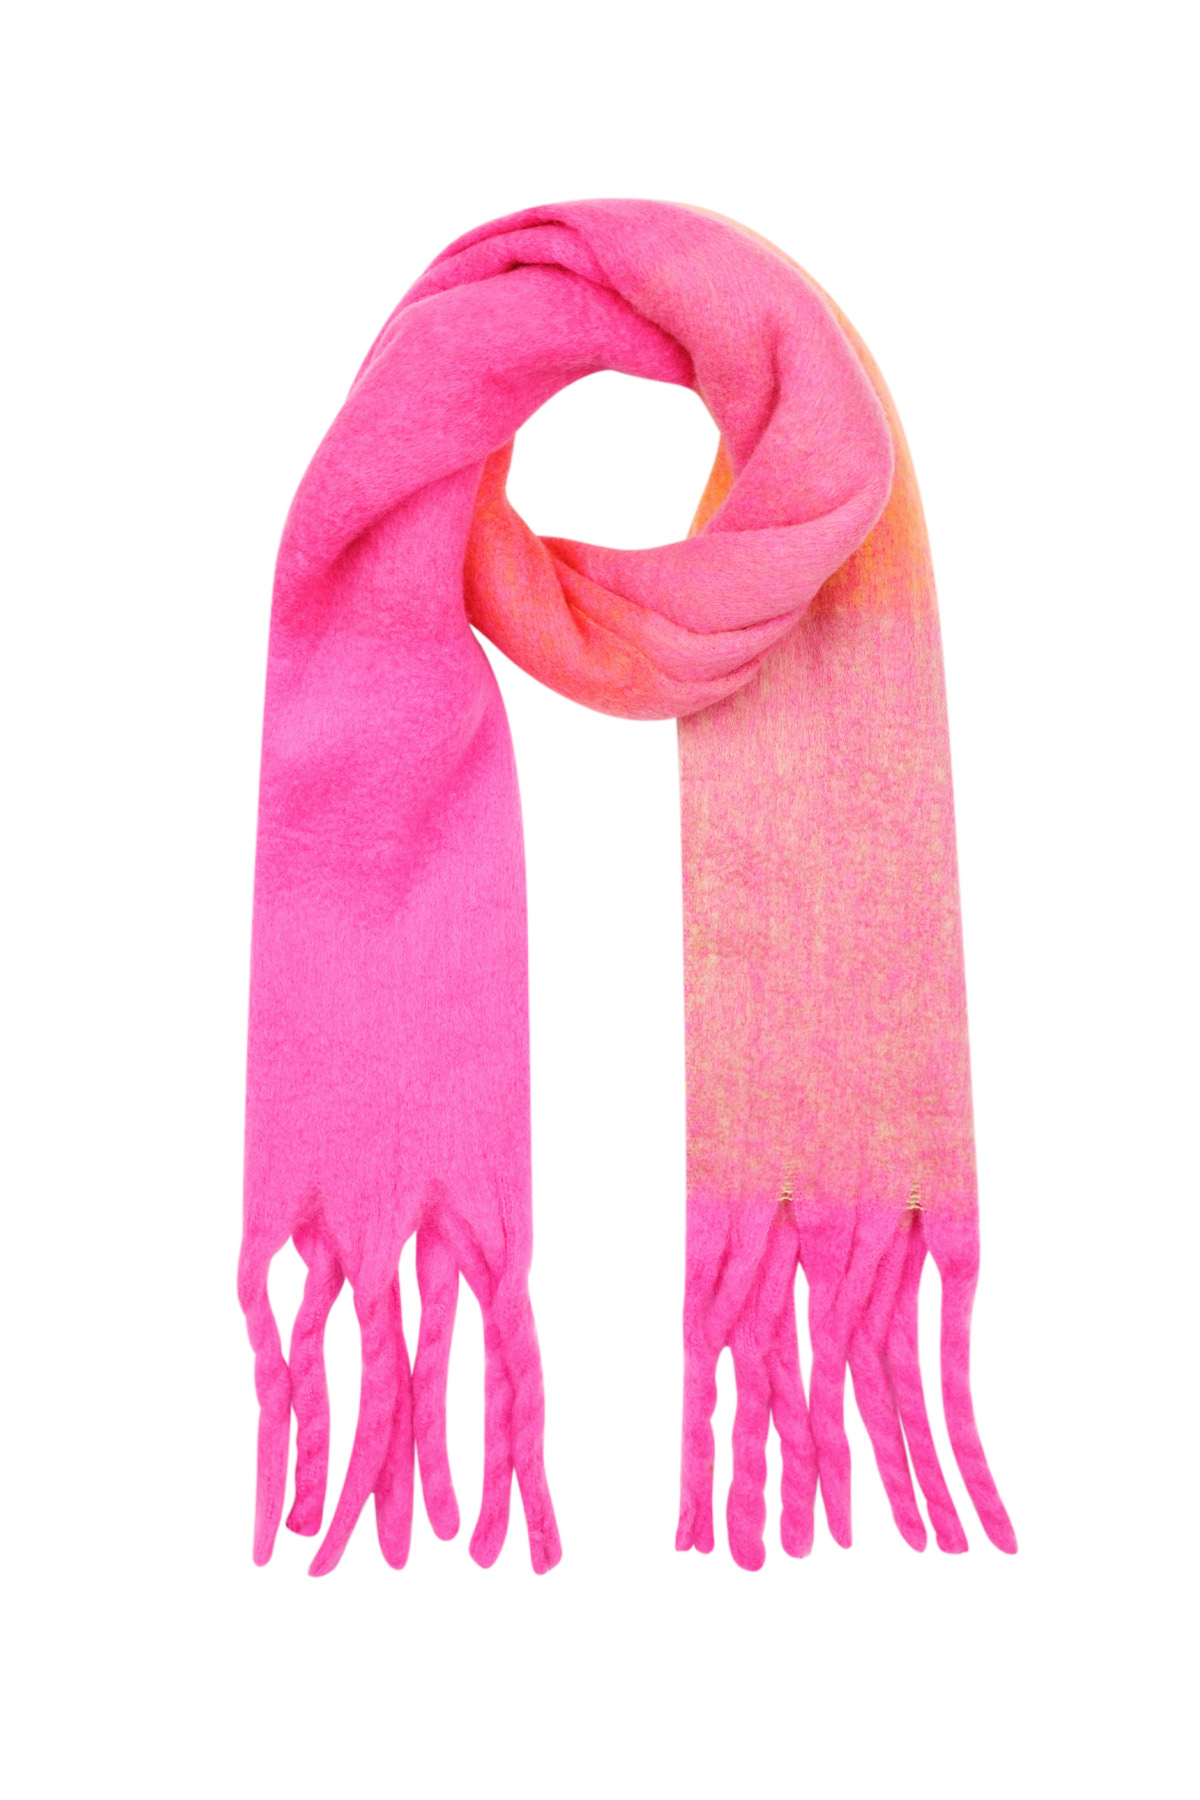 Echarpe couleurs claires Fuchsia Polyester